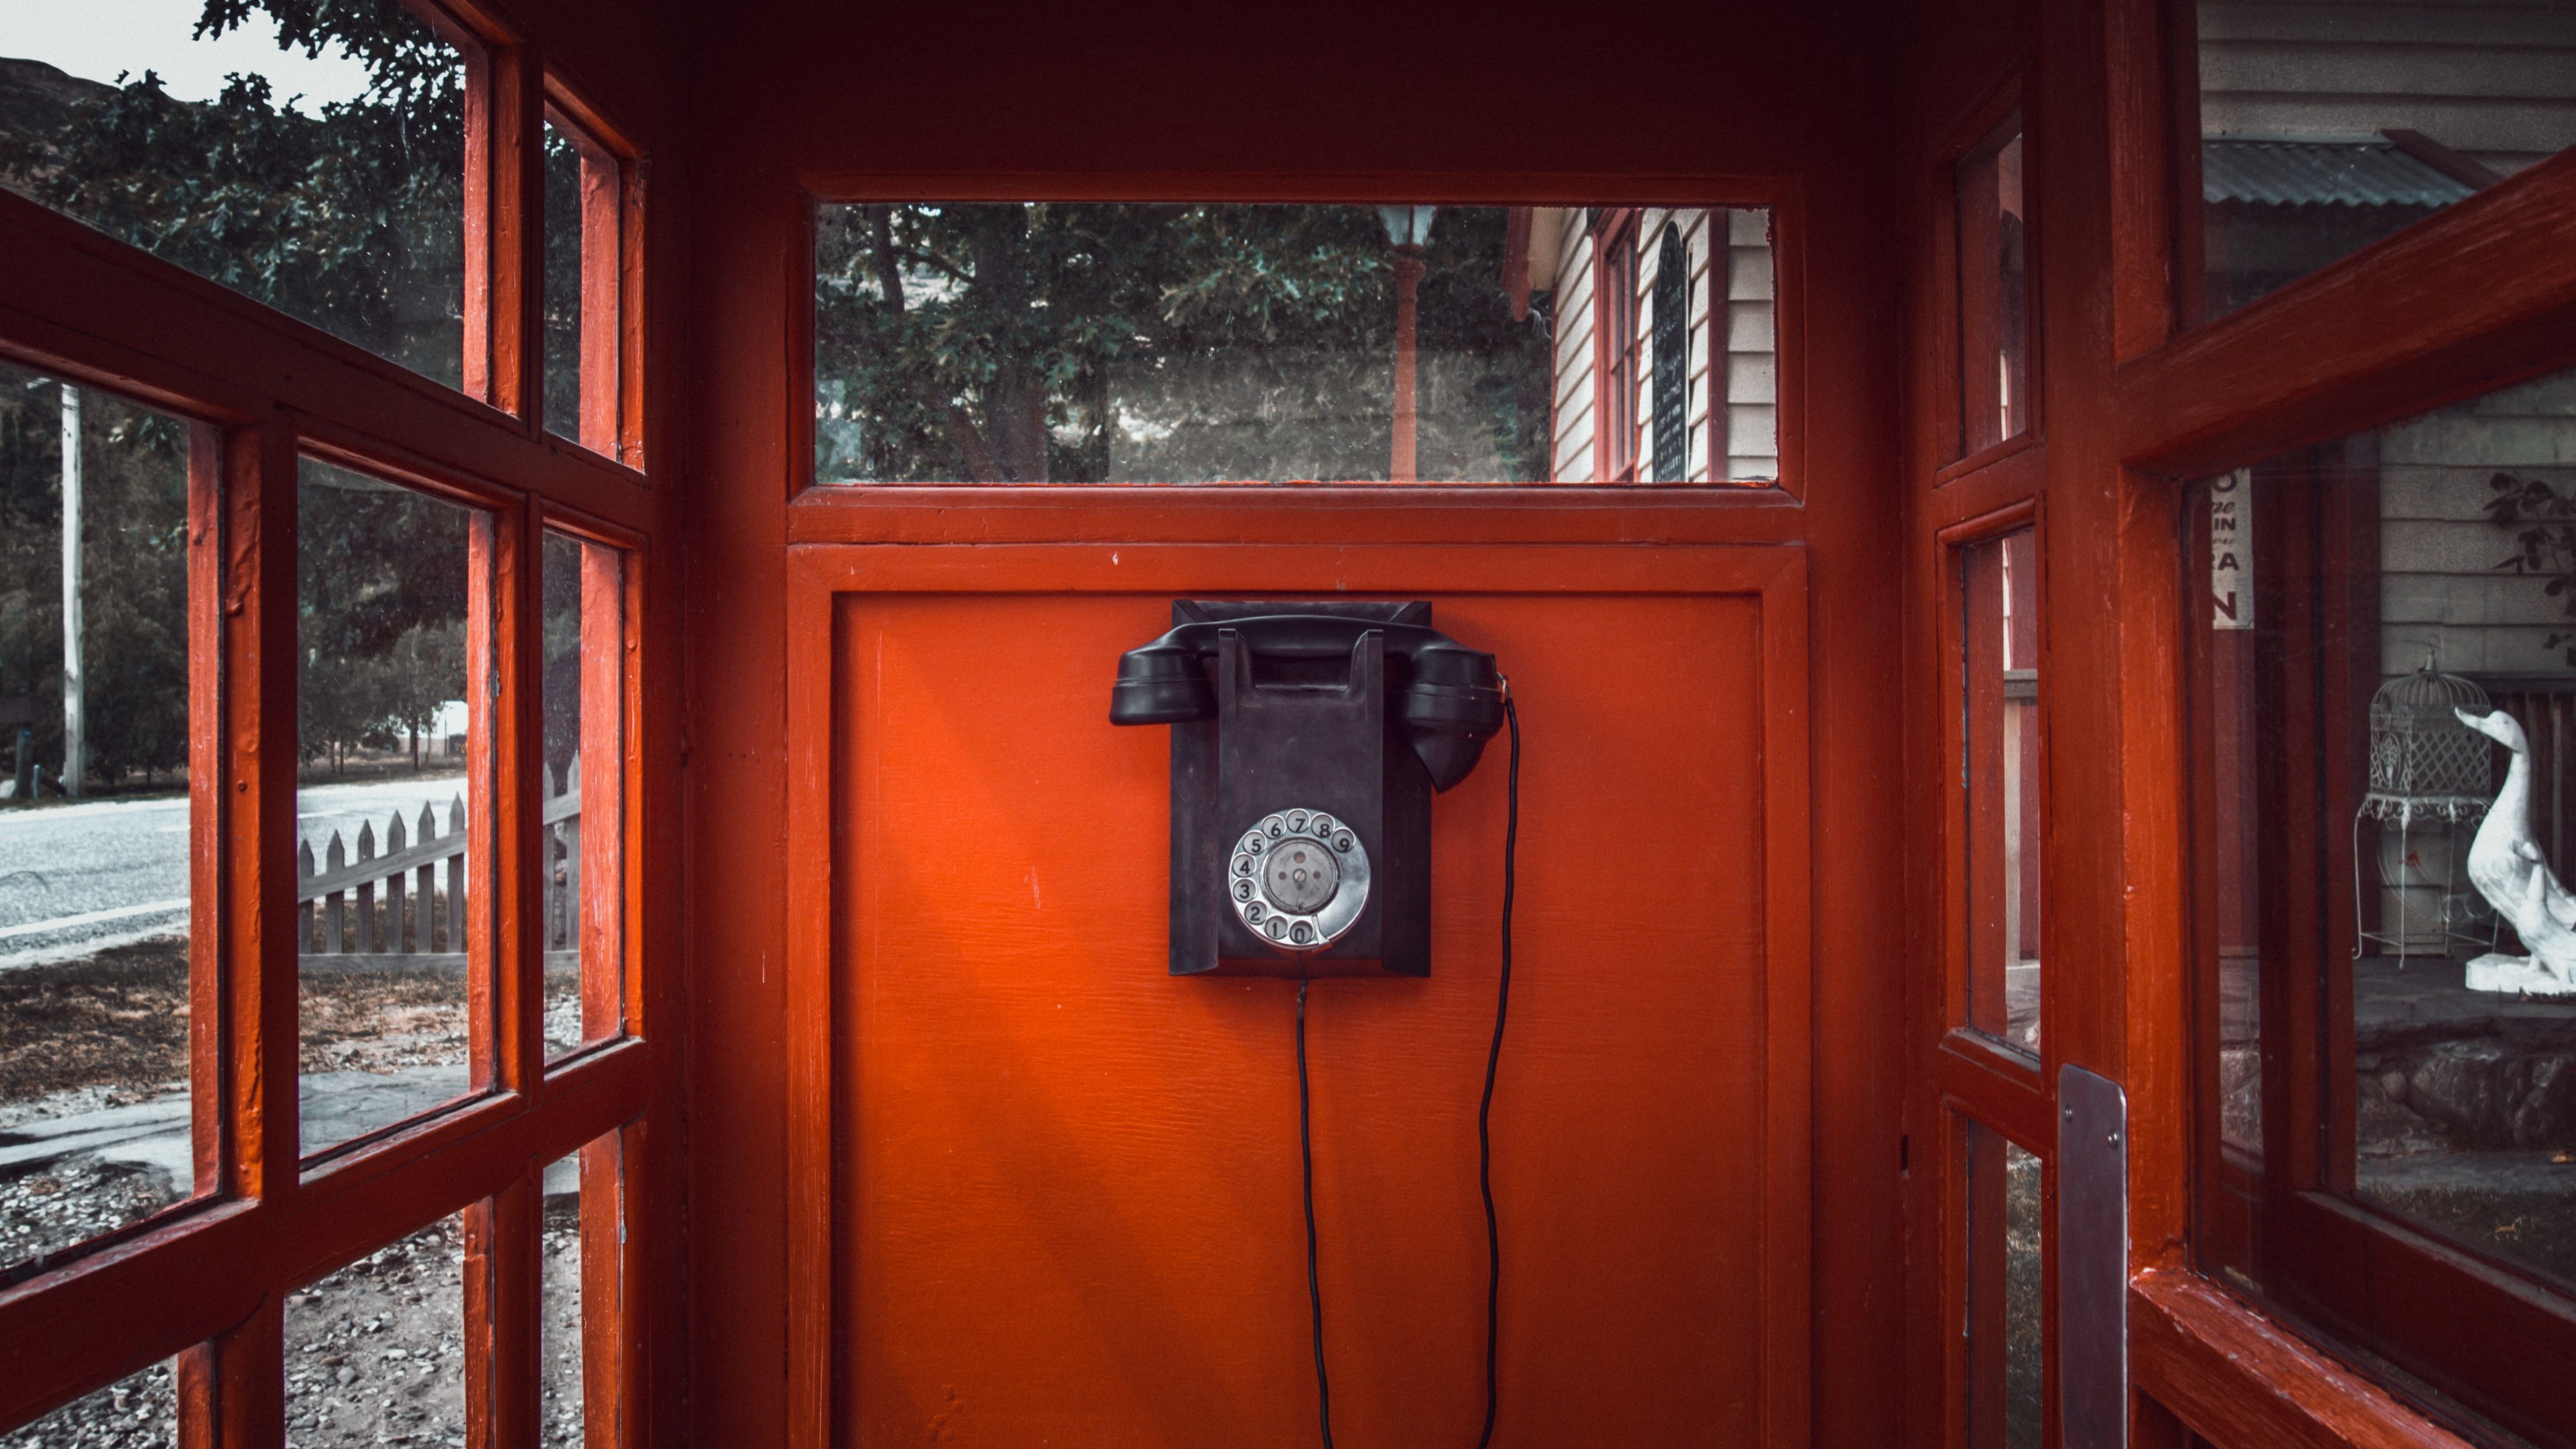 A photo of the inside of a telephone booth.